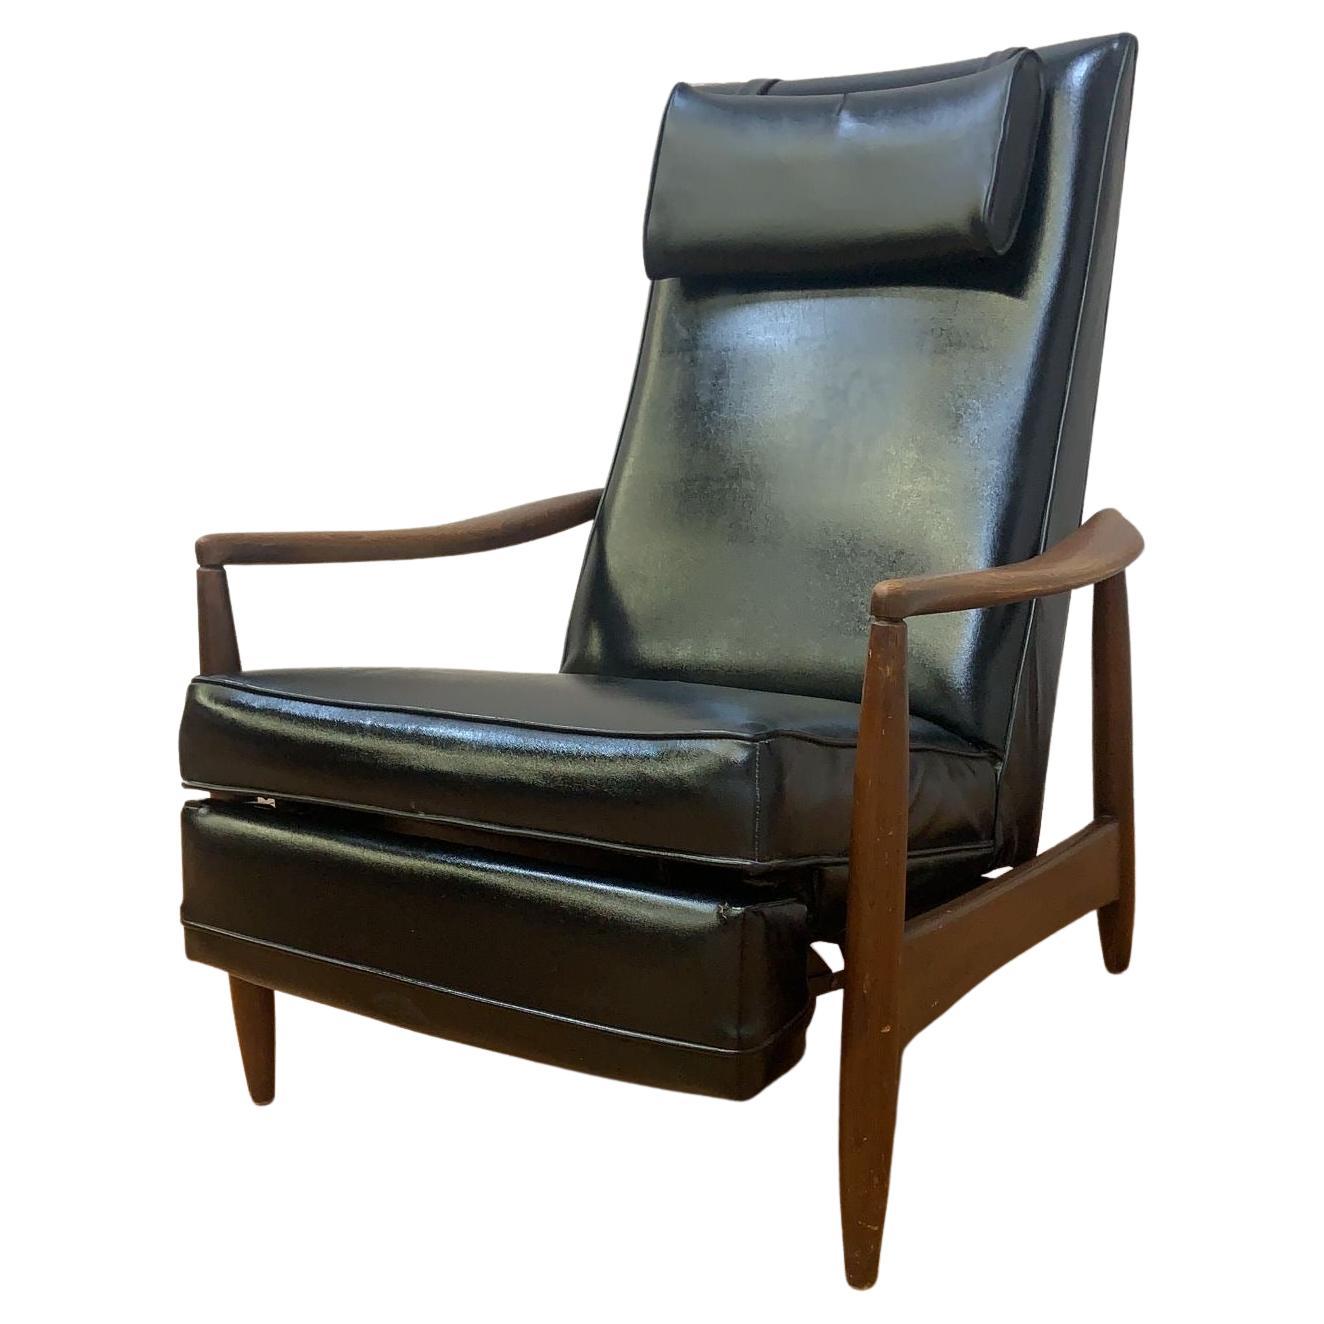 MCM Milo Baughman Style Aston Re-Invented Recliner in Black Leather